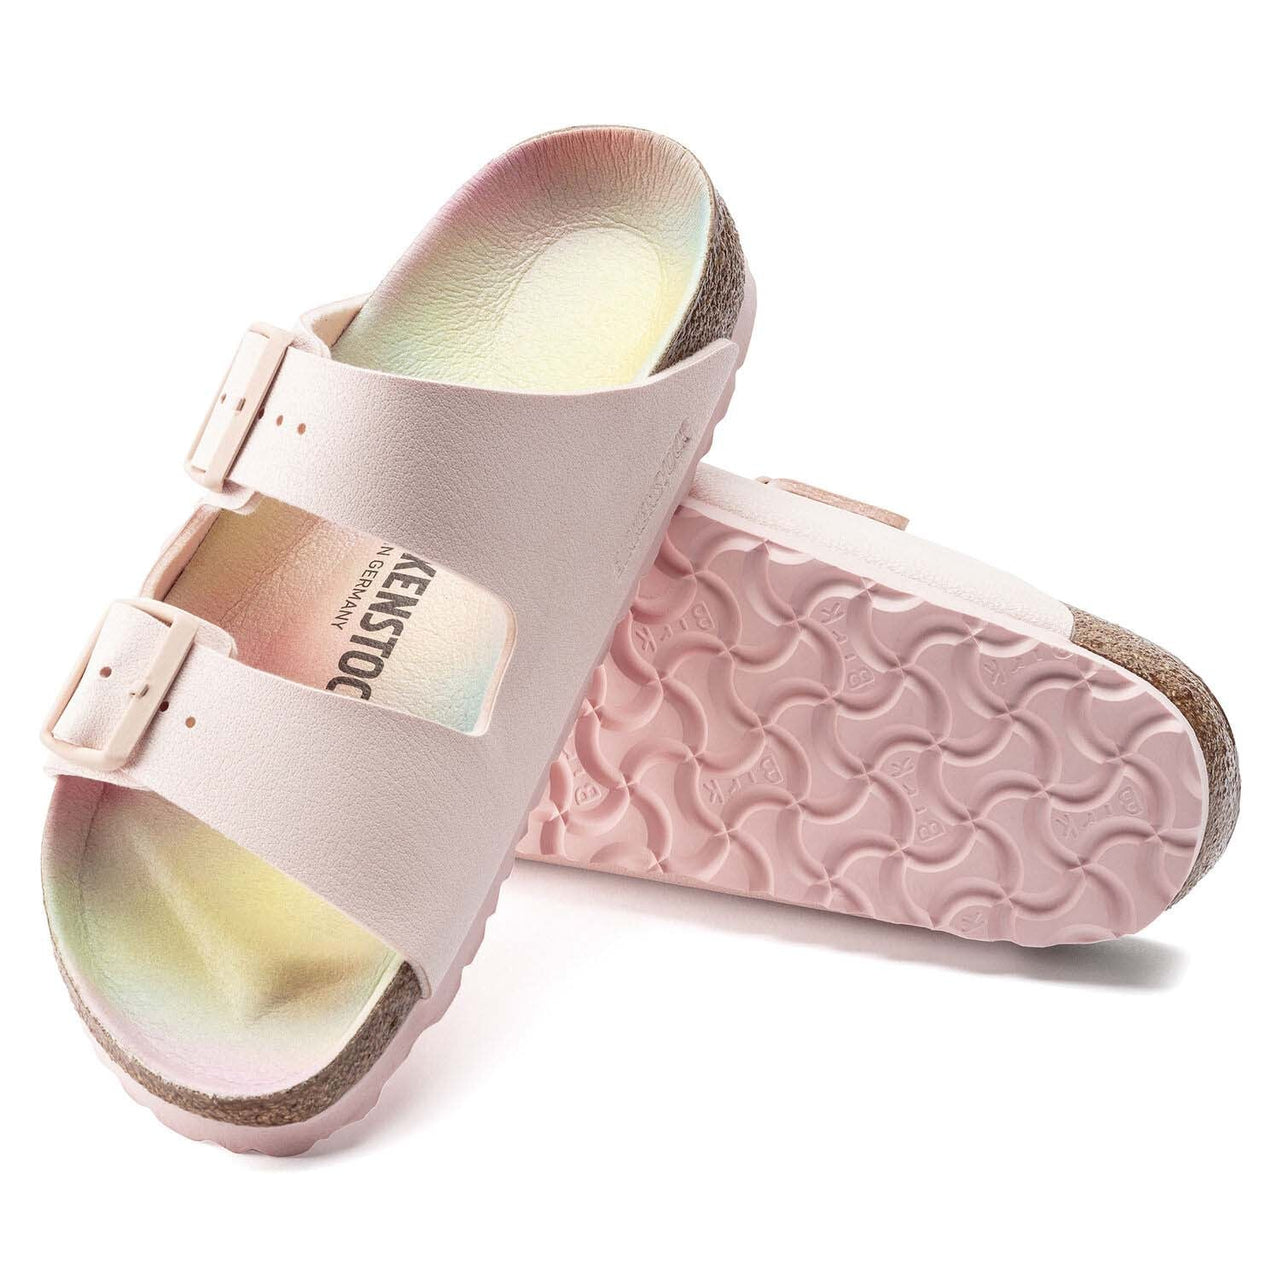 Arizona Vegan Sandals with cushioned insole and shock-absorbing EVA sole